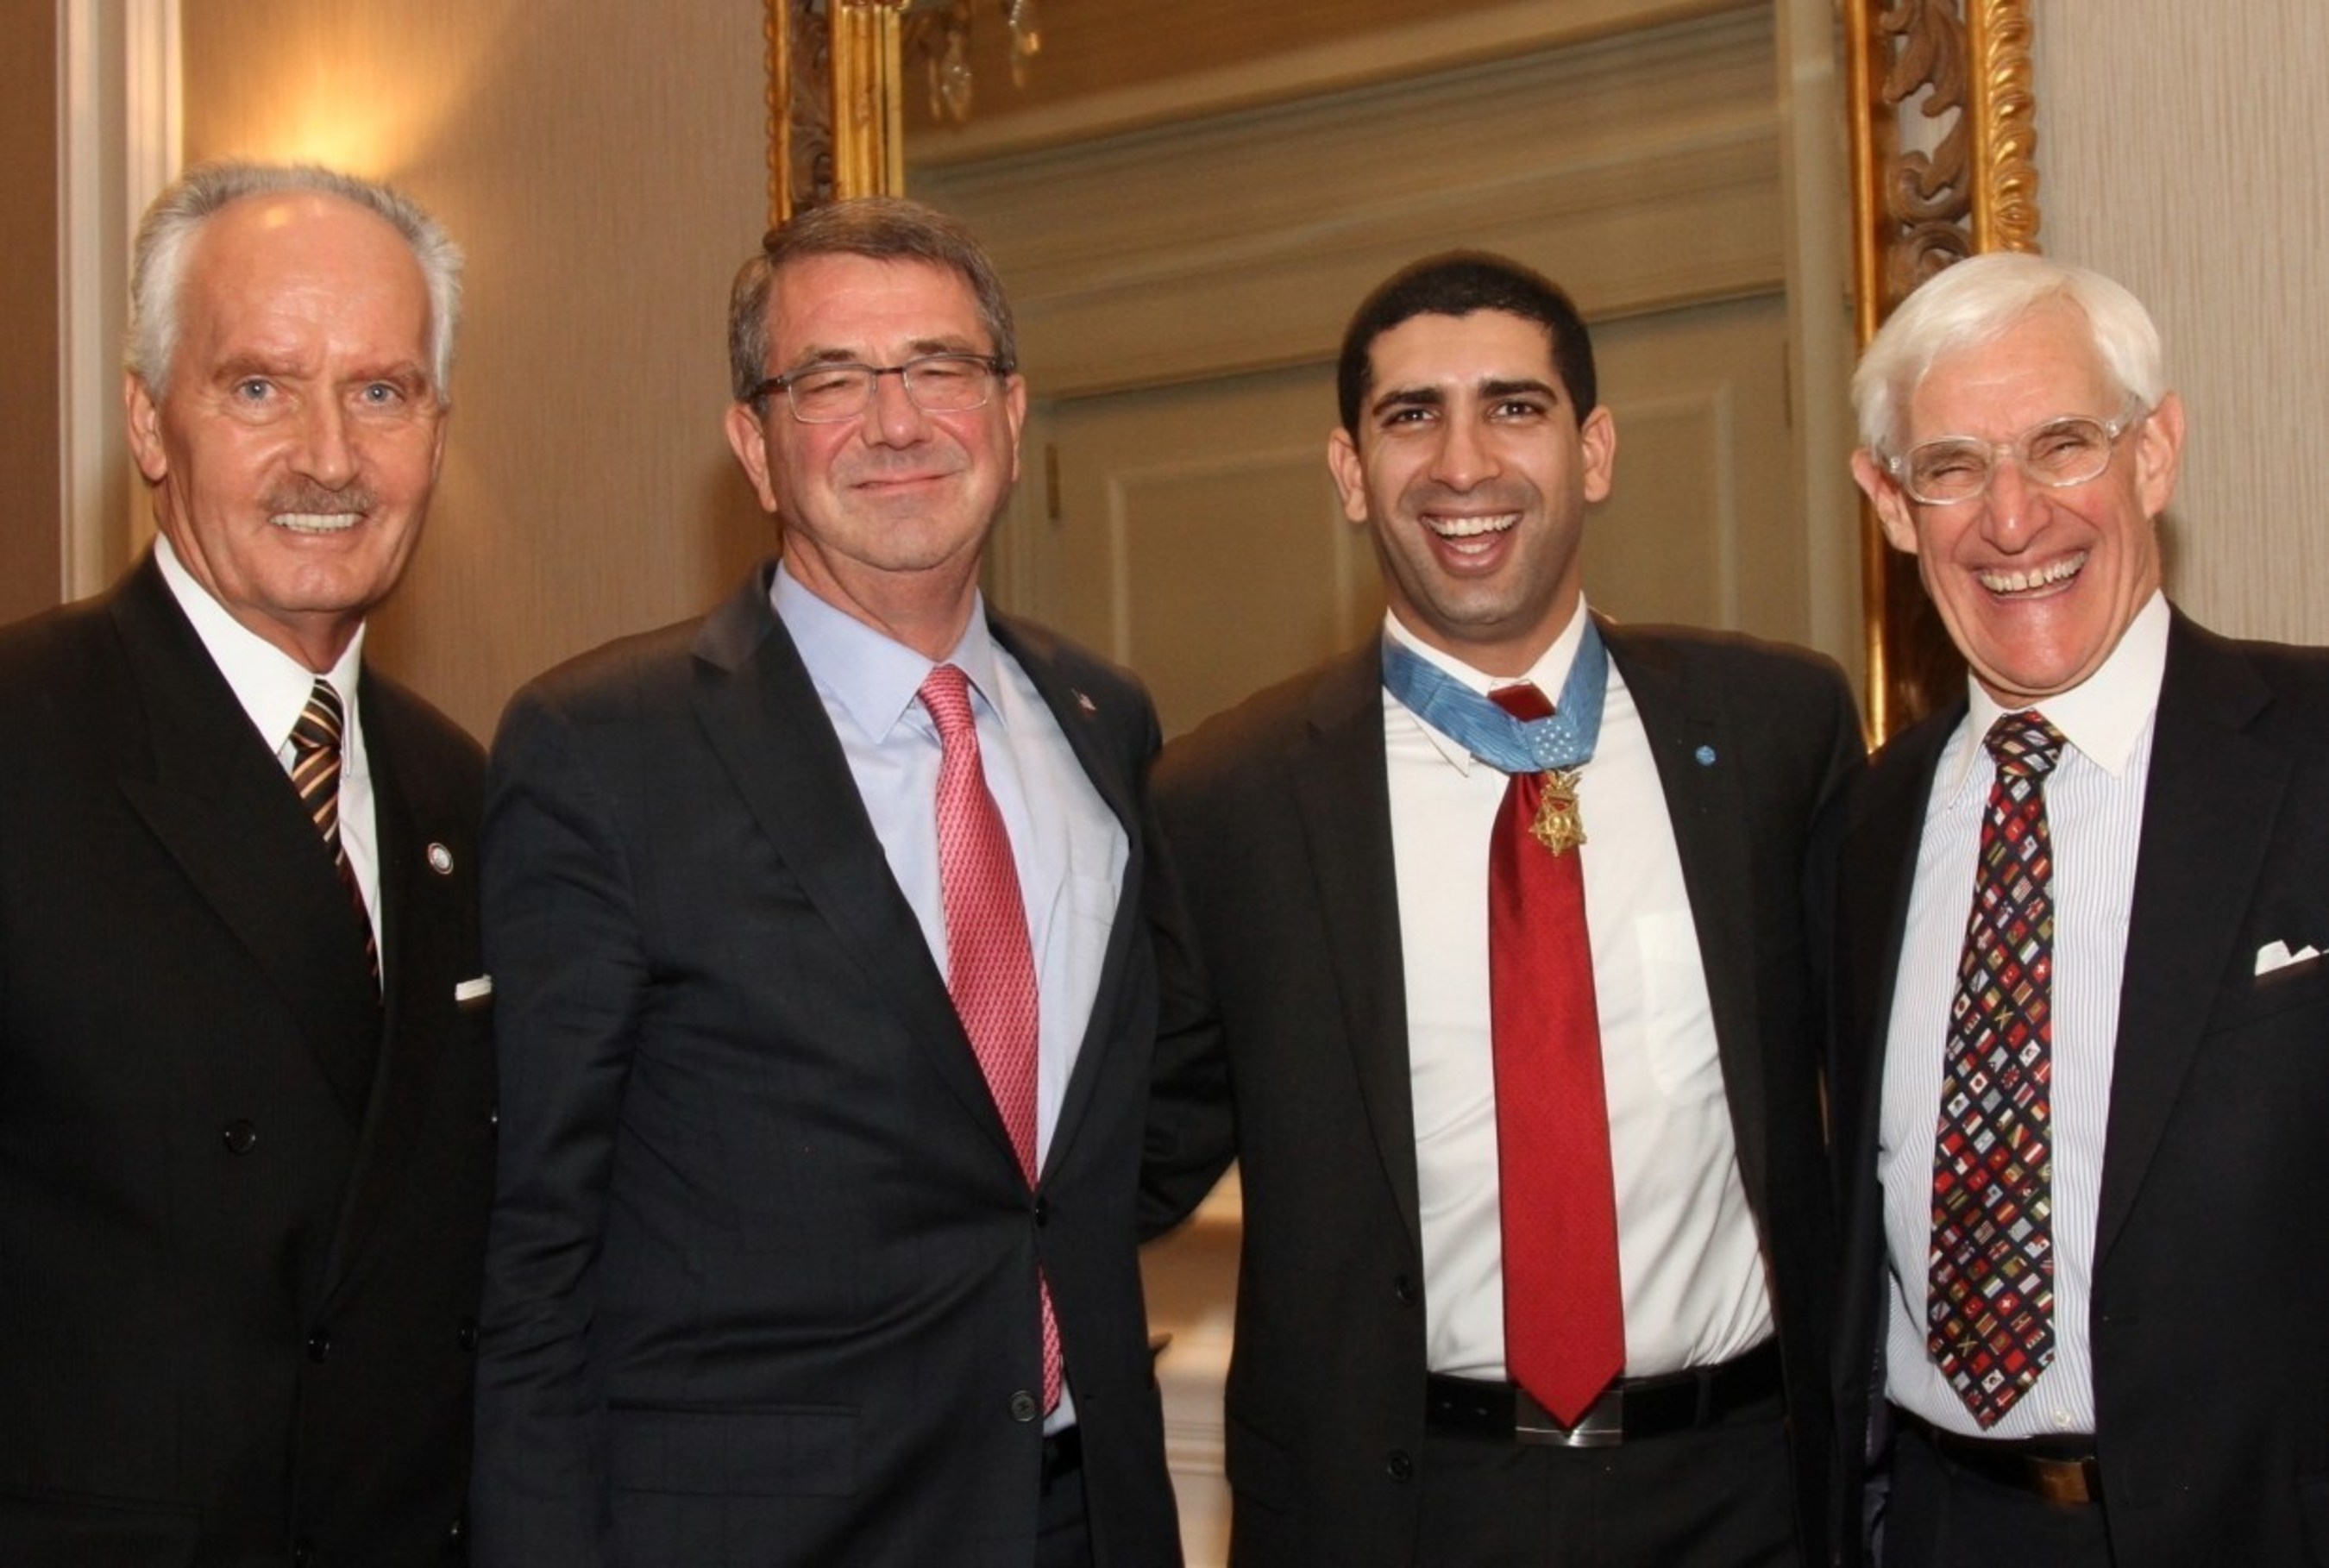 Tony Culley-Foster, President & CEO of the World Affairs Council-DC; The Hon. Ash Carter, US Secretary of Defense; Capt. Florent Groberg, Medal of Honor Recipient; and Patrick Gross, Founding Chairman of the World Affairs Council-DC. *Credit: Focused Images*